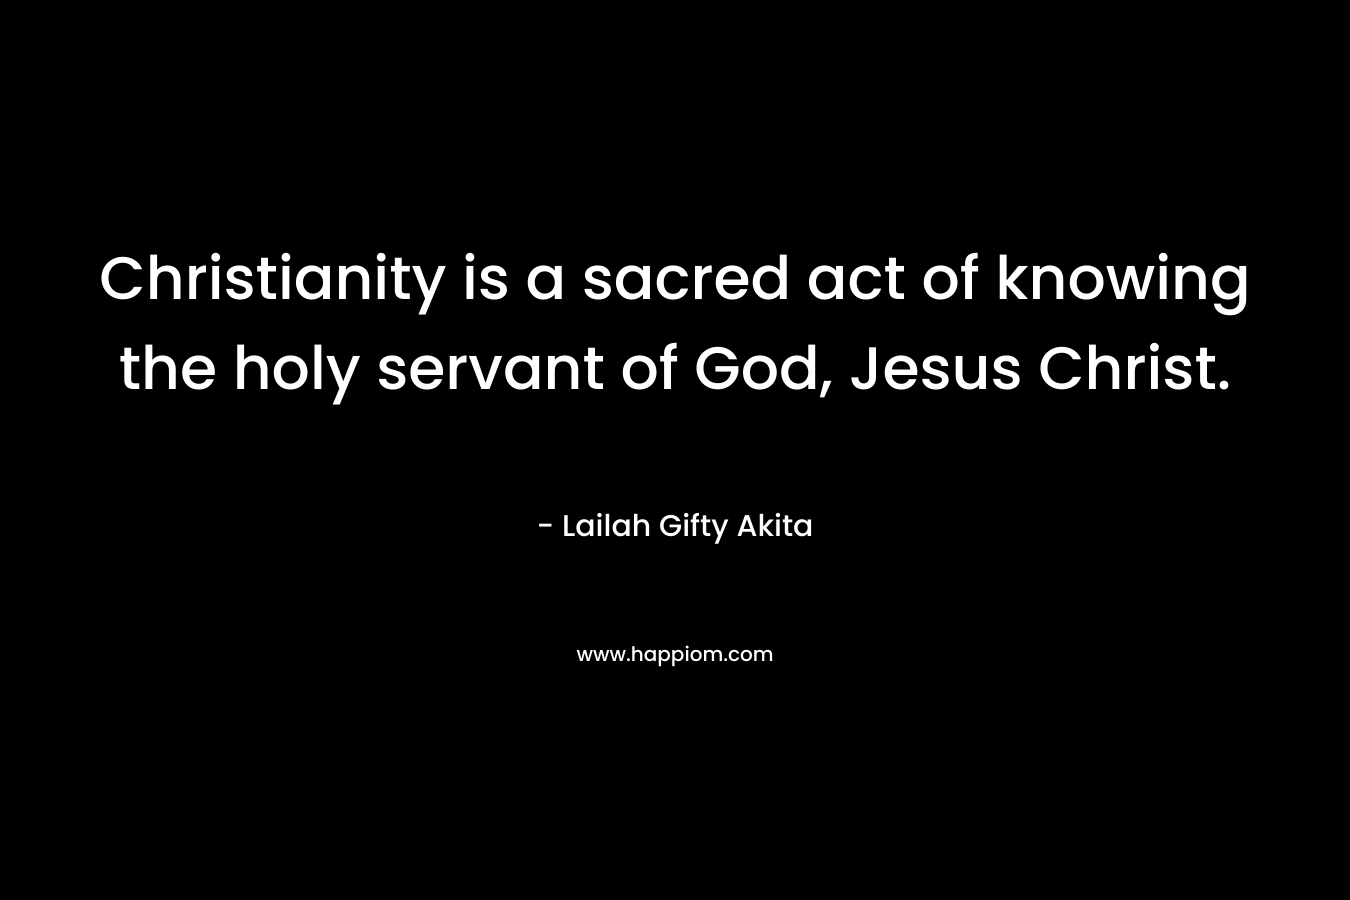 Christianity is a sacred act of knowing the holy servant of God, Jesus Christ.